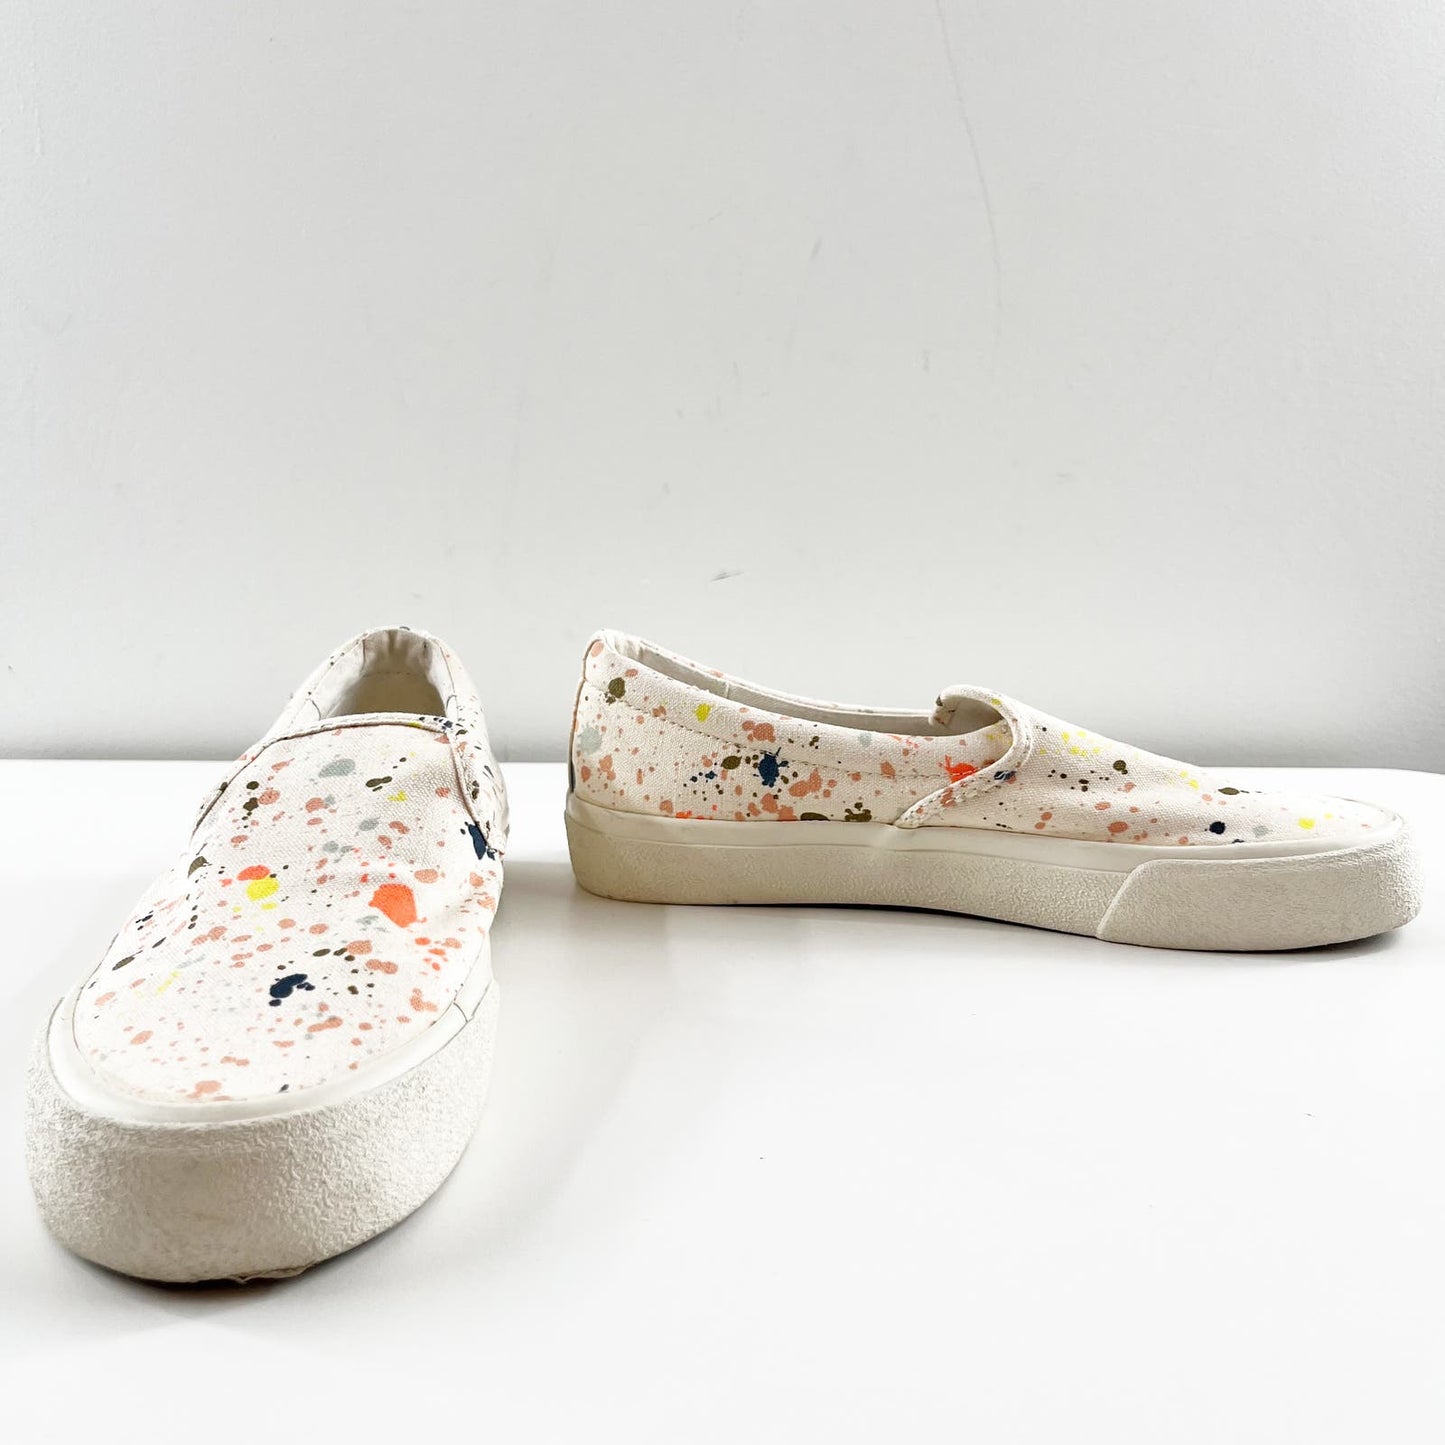 Madewell Sidewalk Slip-On Sneakers in Paint Spattered Recycled Canvas White 7